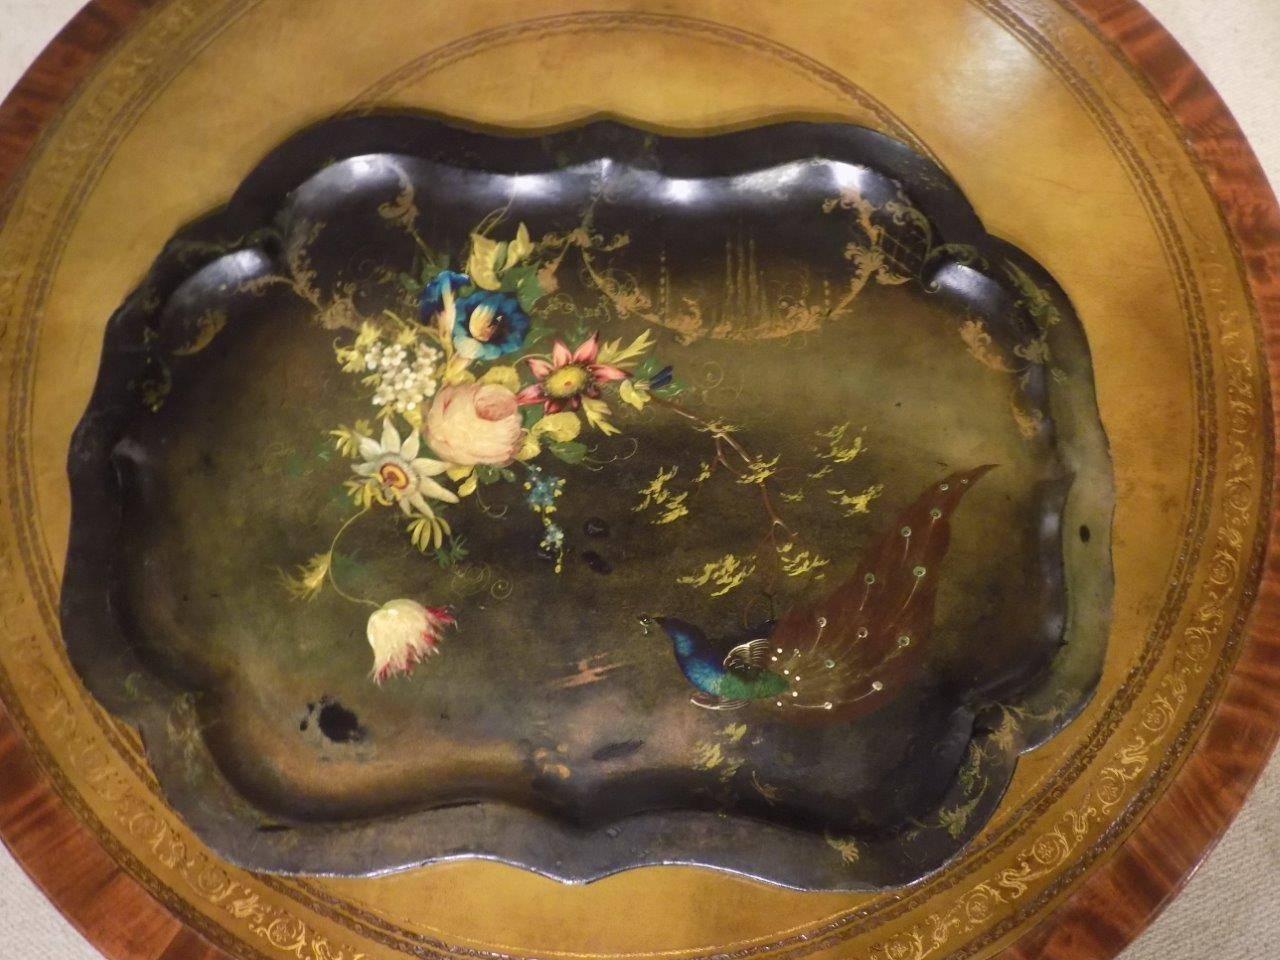 A Victorian period papier mâché tray. With a scalloped border and decorated with a peacock and floral detail to the black and gold lacquer ground. English, circa 1860-1880.

Dimensions: 30